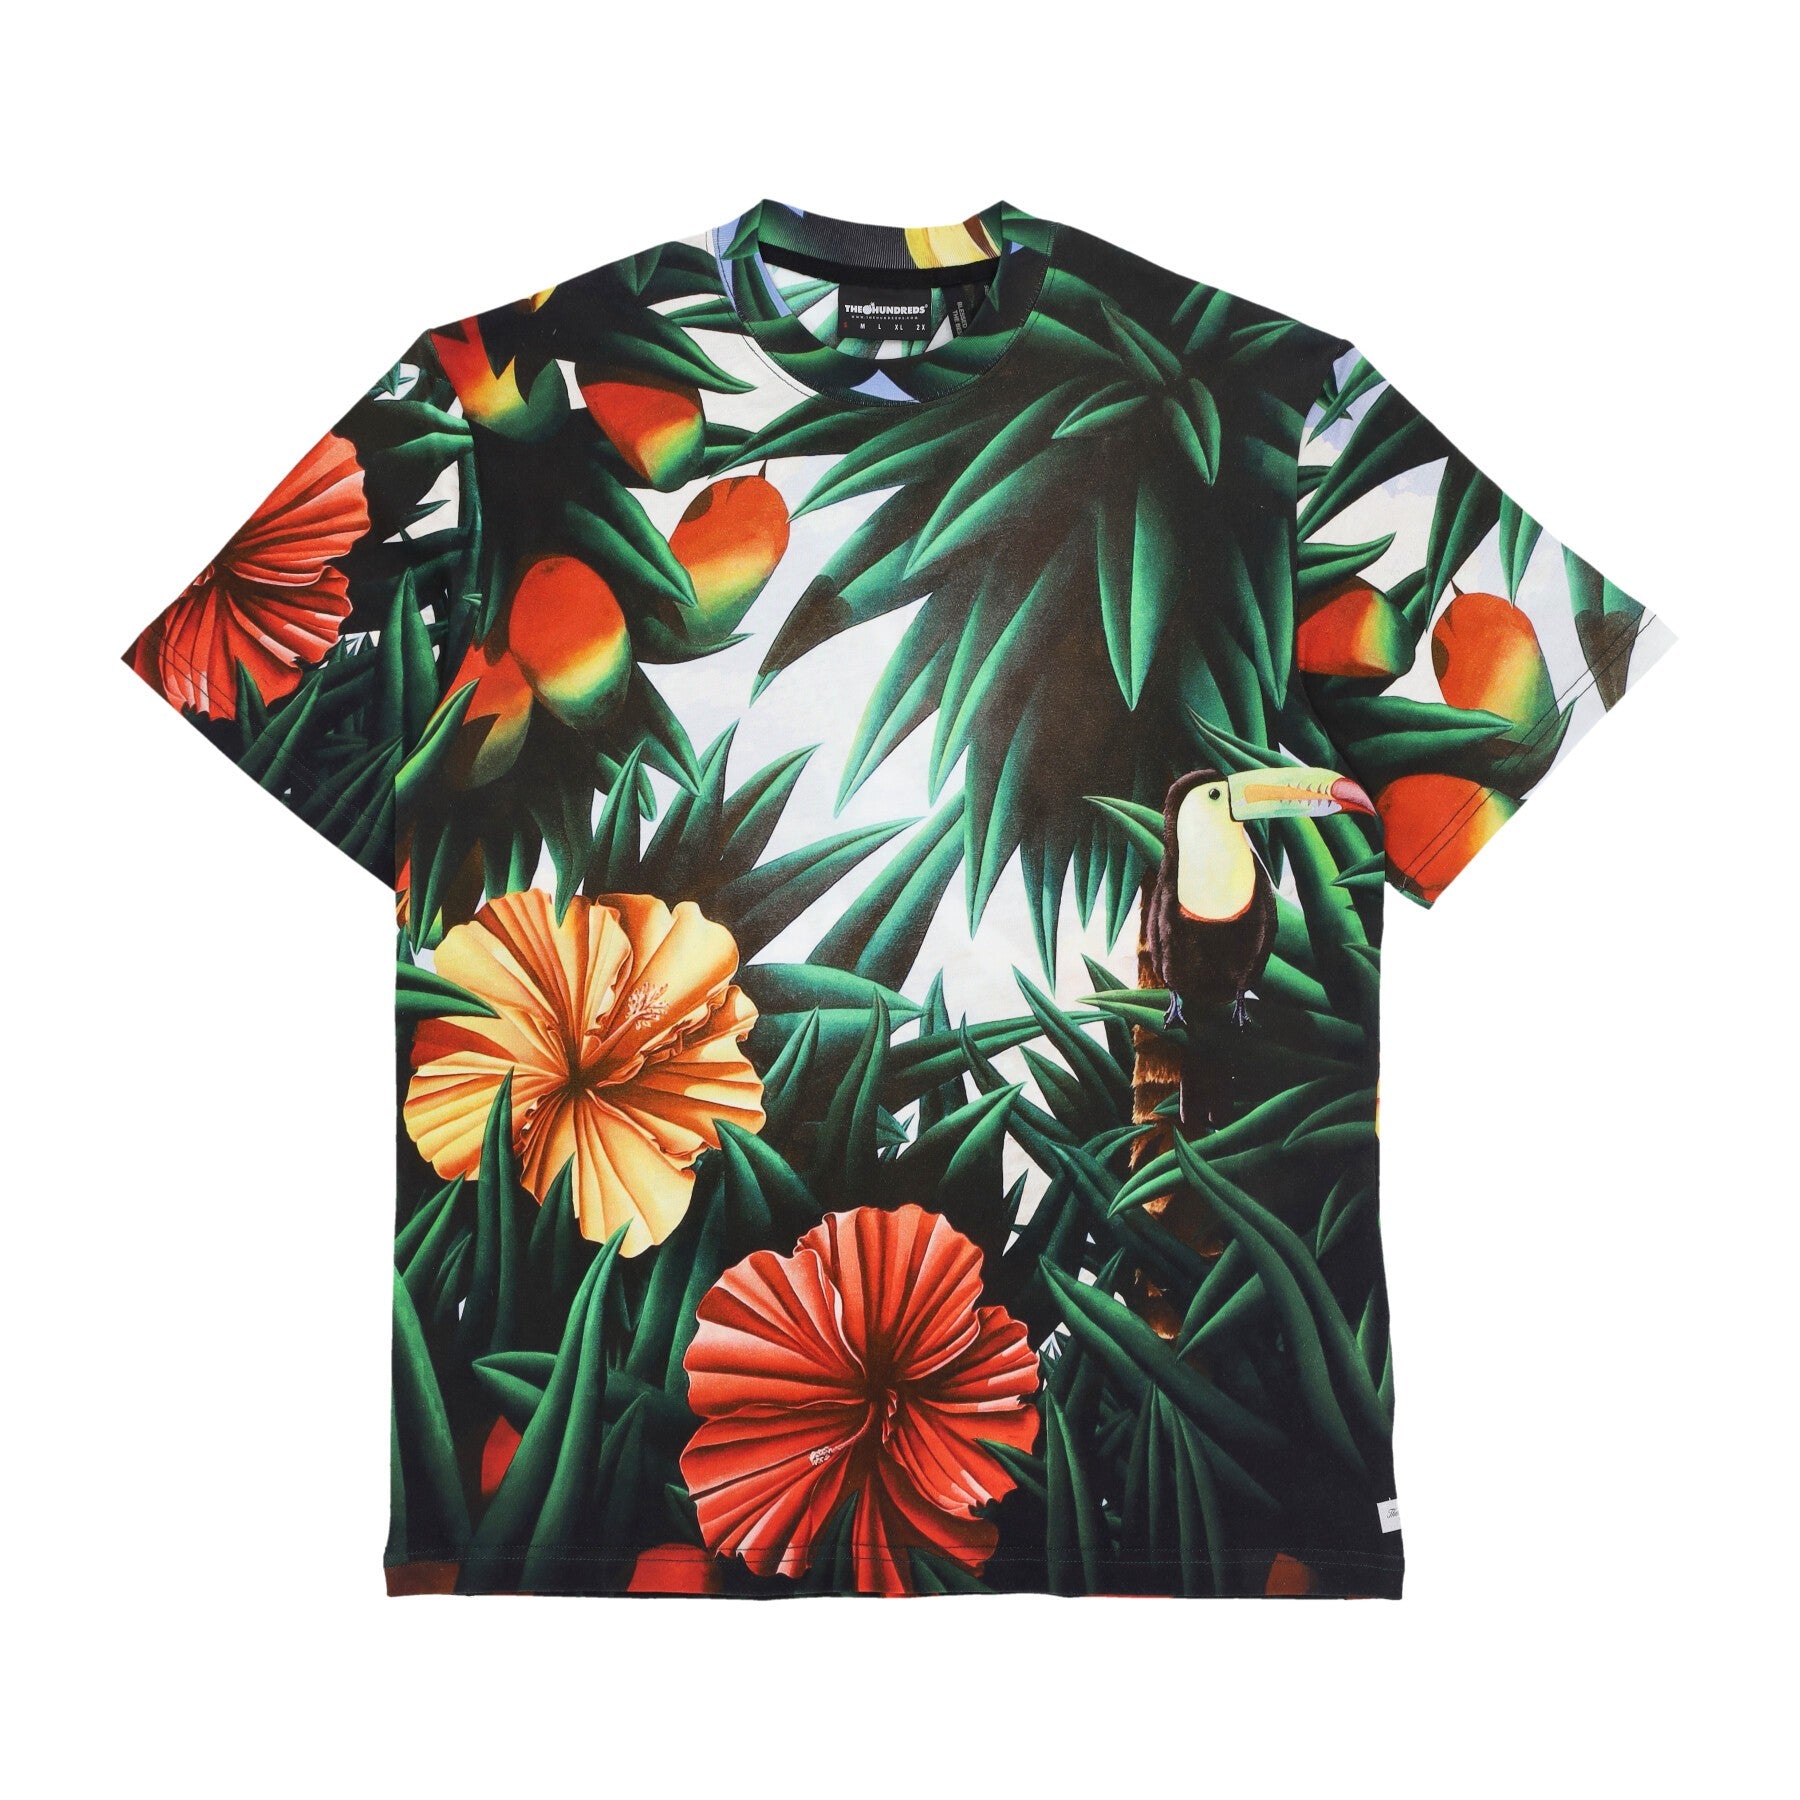 The Hundreds, Maglietta Uomo Tropic Tee, Forest